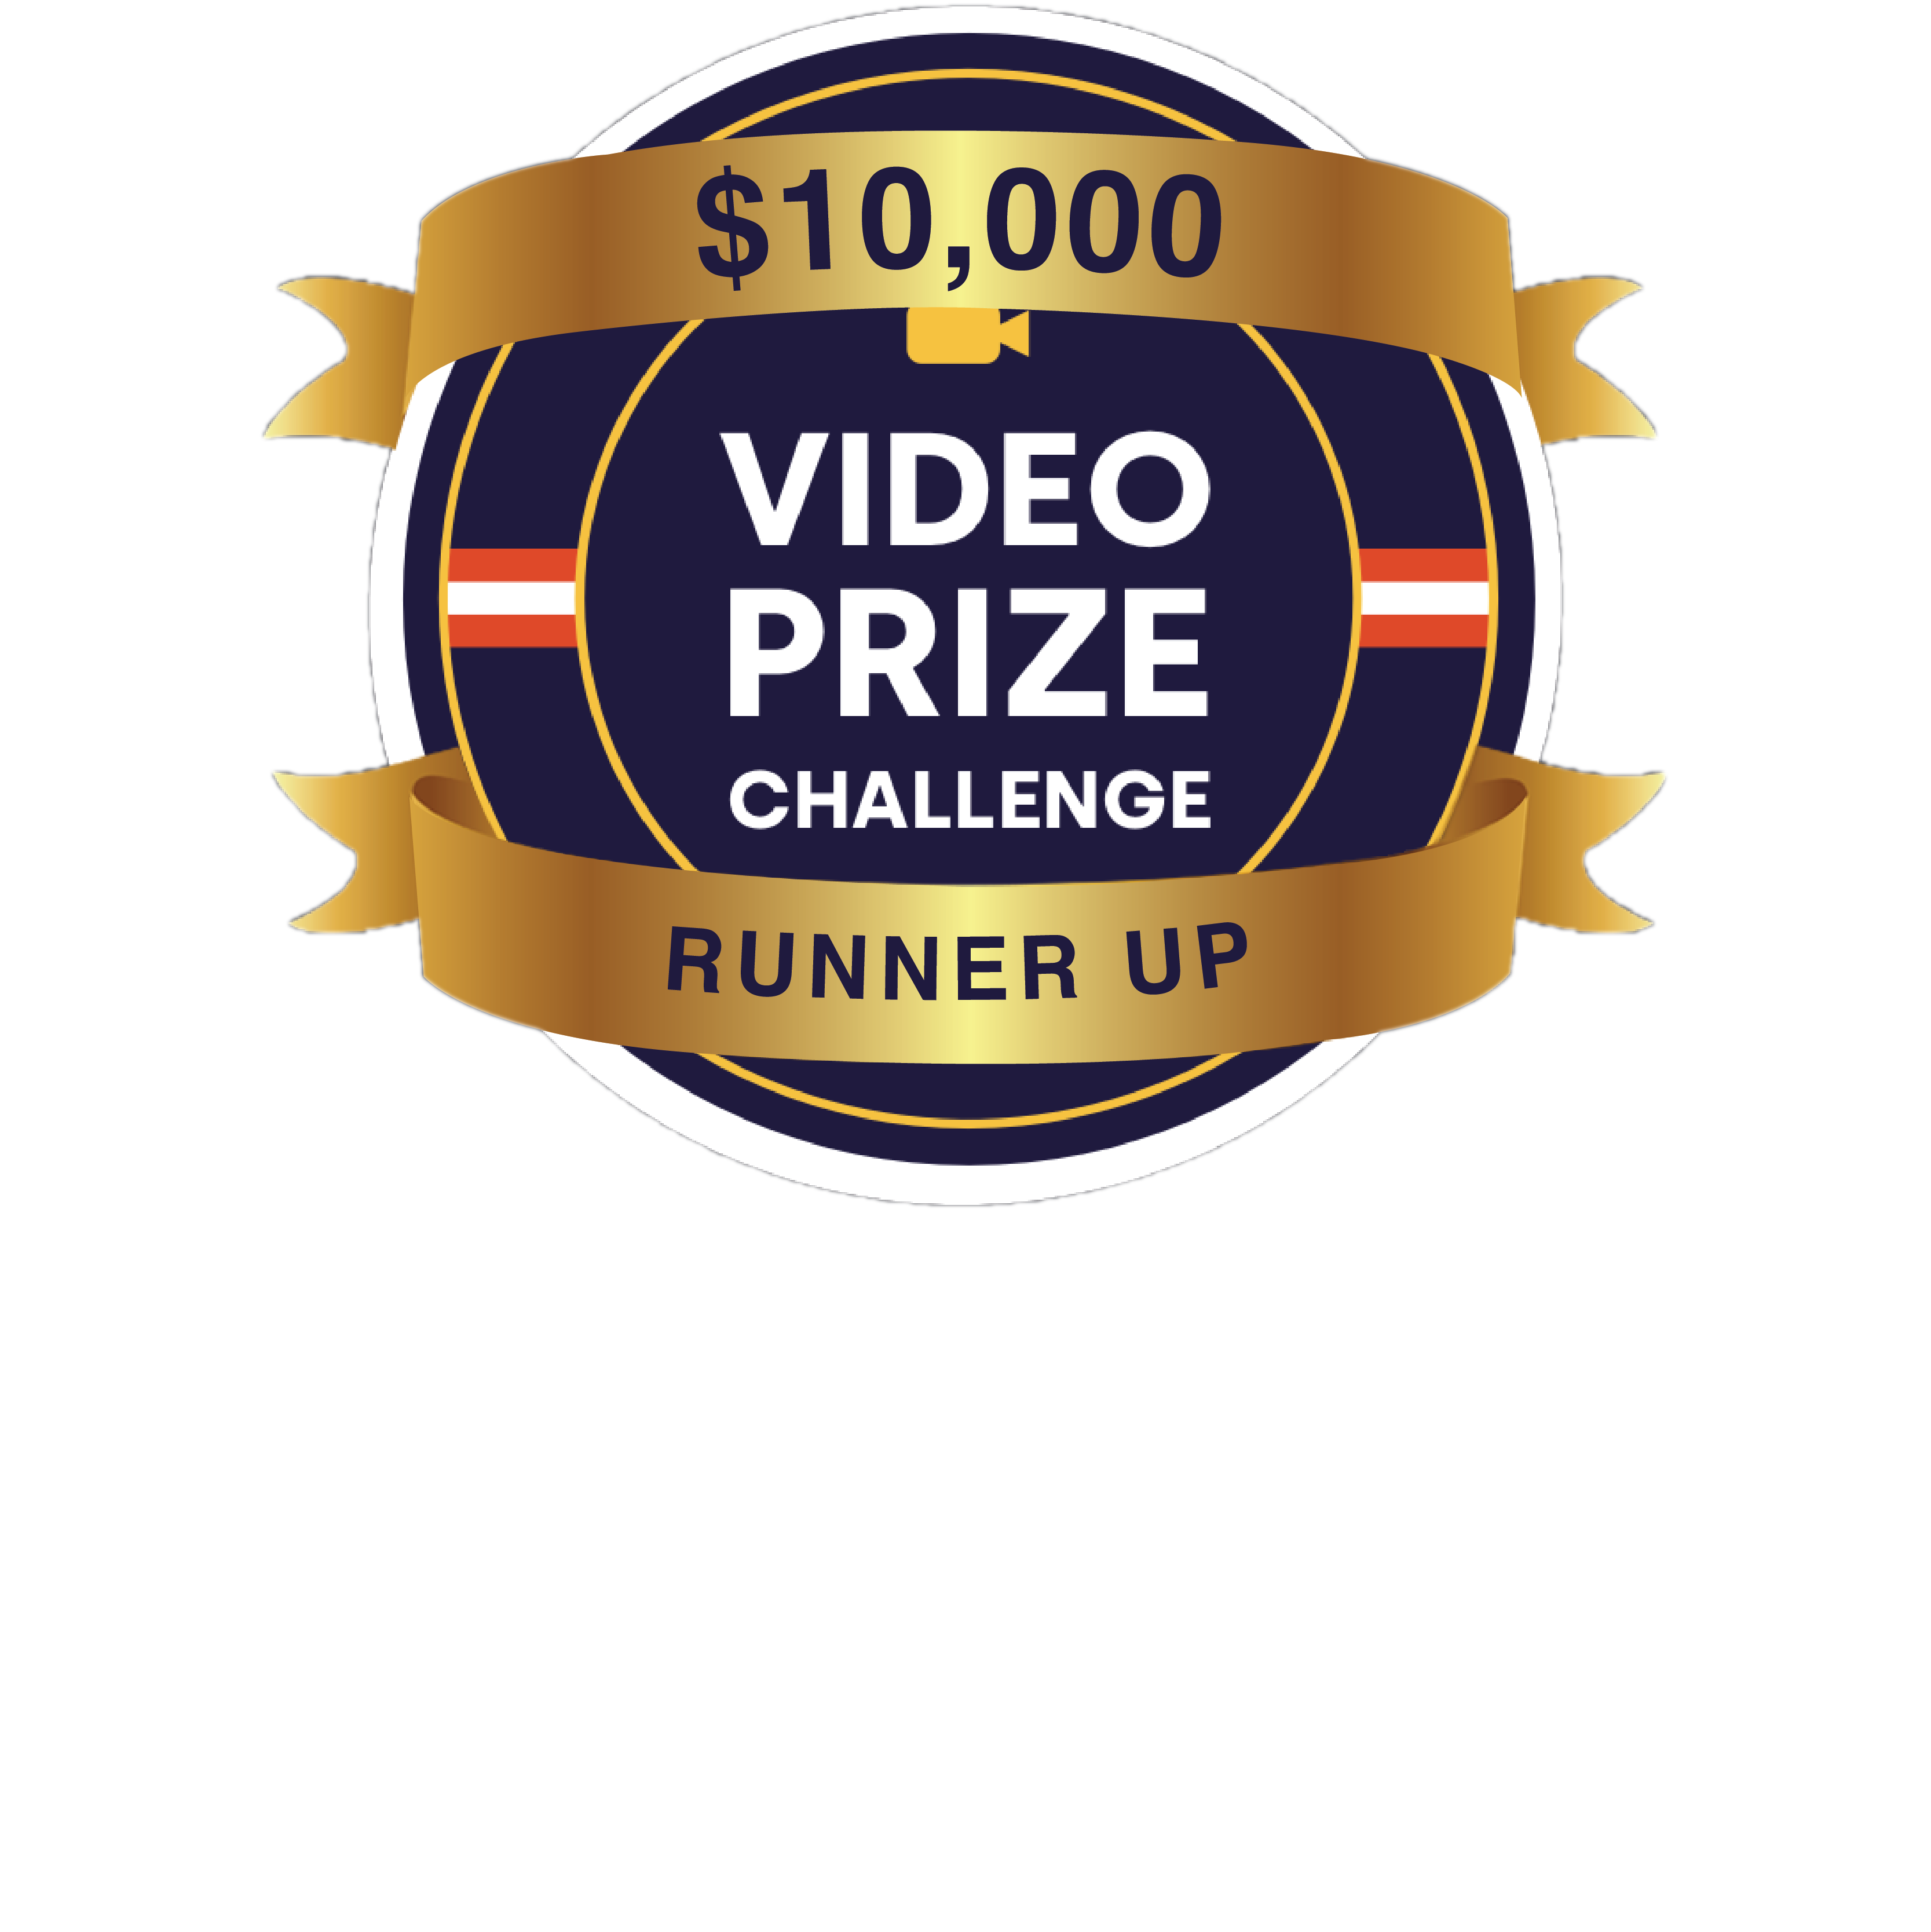 Video Prize Challenge logo overlaid with $10,000 Runner Up